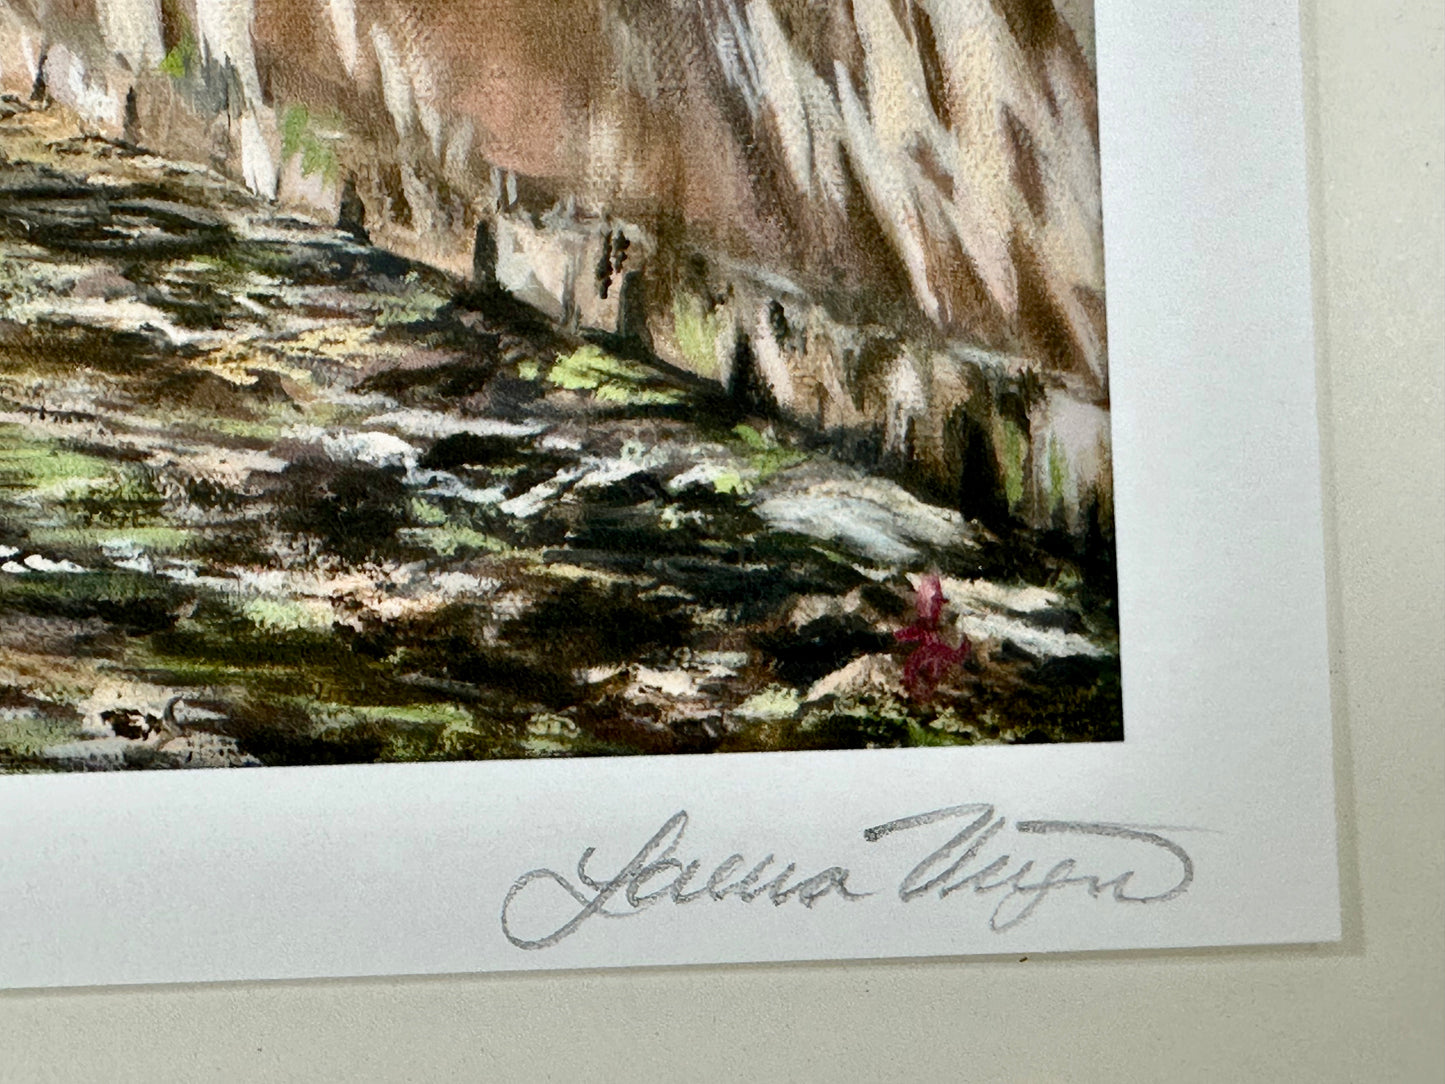 "Mt Shosha" by Laura Virgin Signed Giclée Print 10"x13" Limited Edition